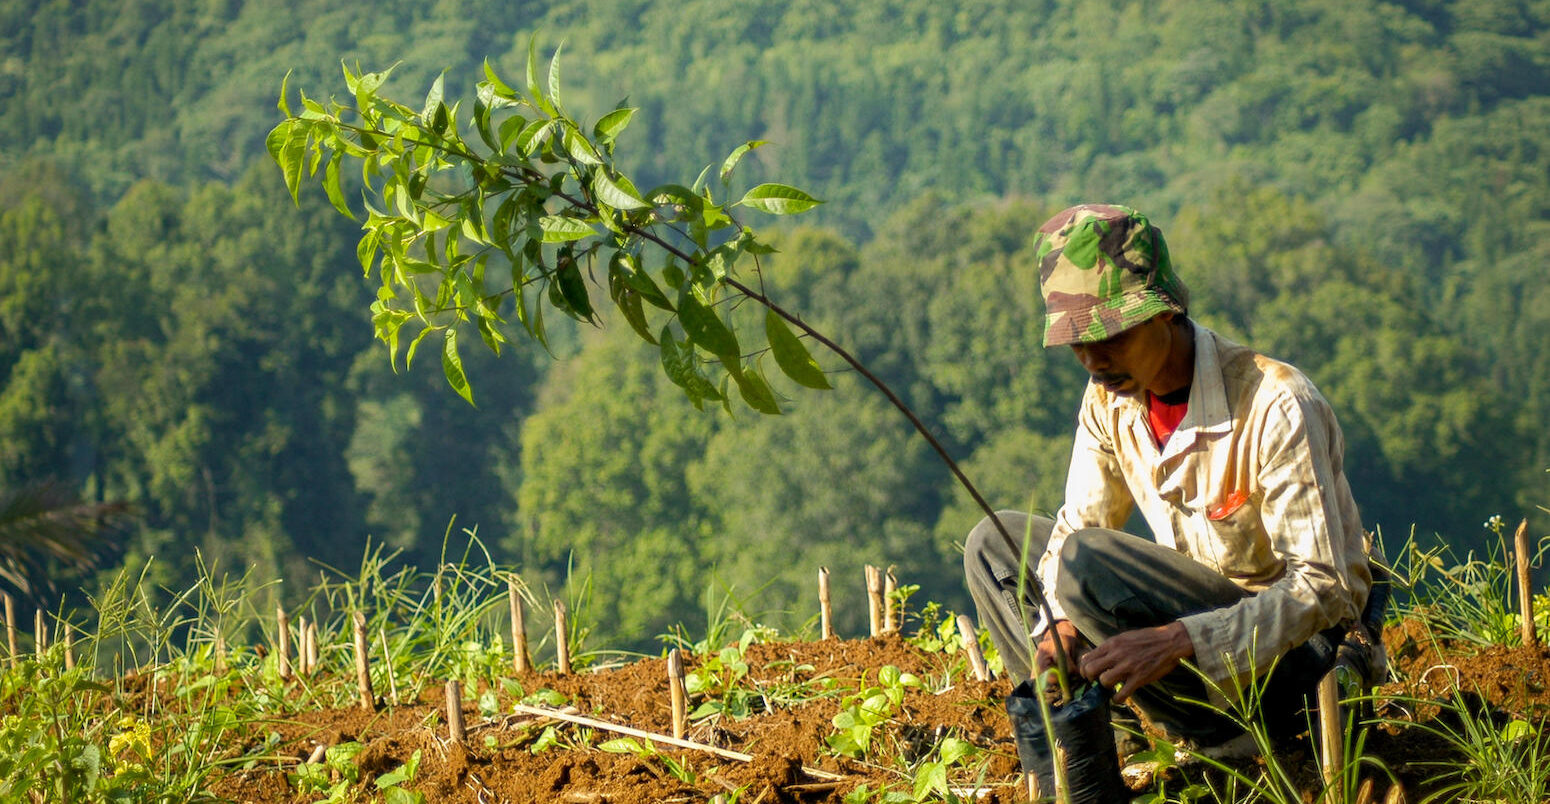 A worker prepares for tree planing in Mount Gede Pangrango National Park, Indonesia.